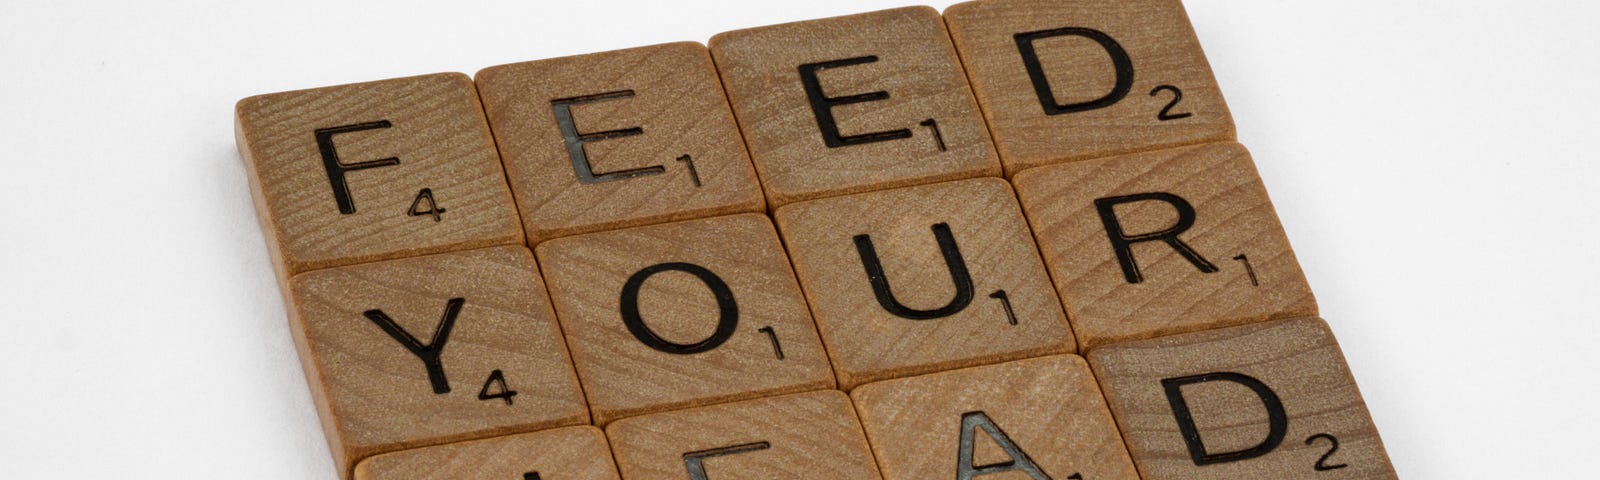 Scrabble pieces arranged as a block spelling the words, “feed your head”